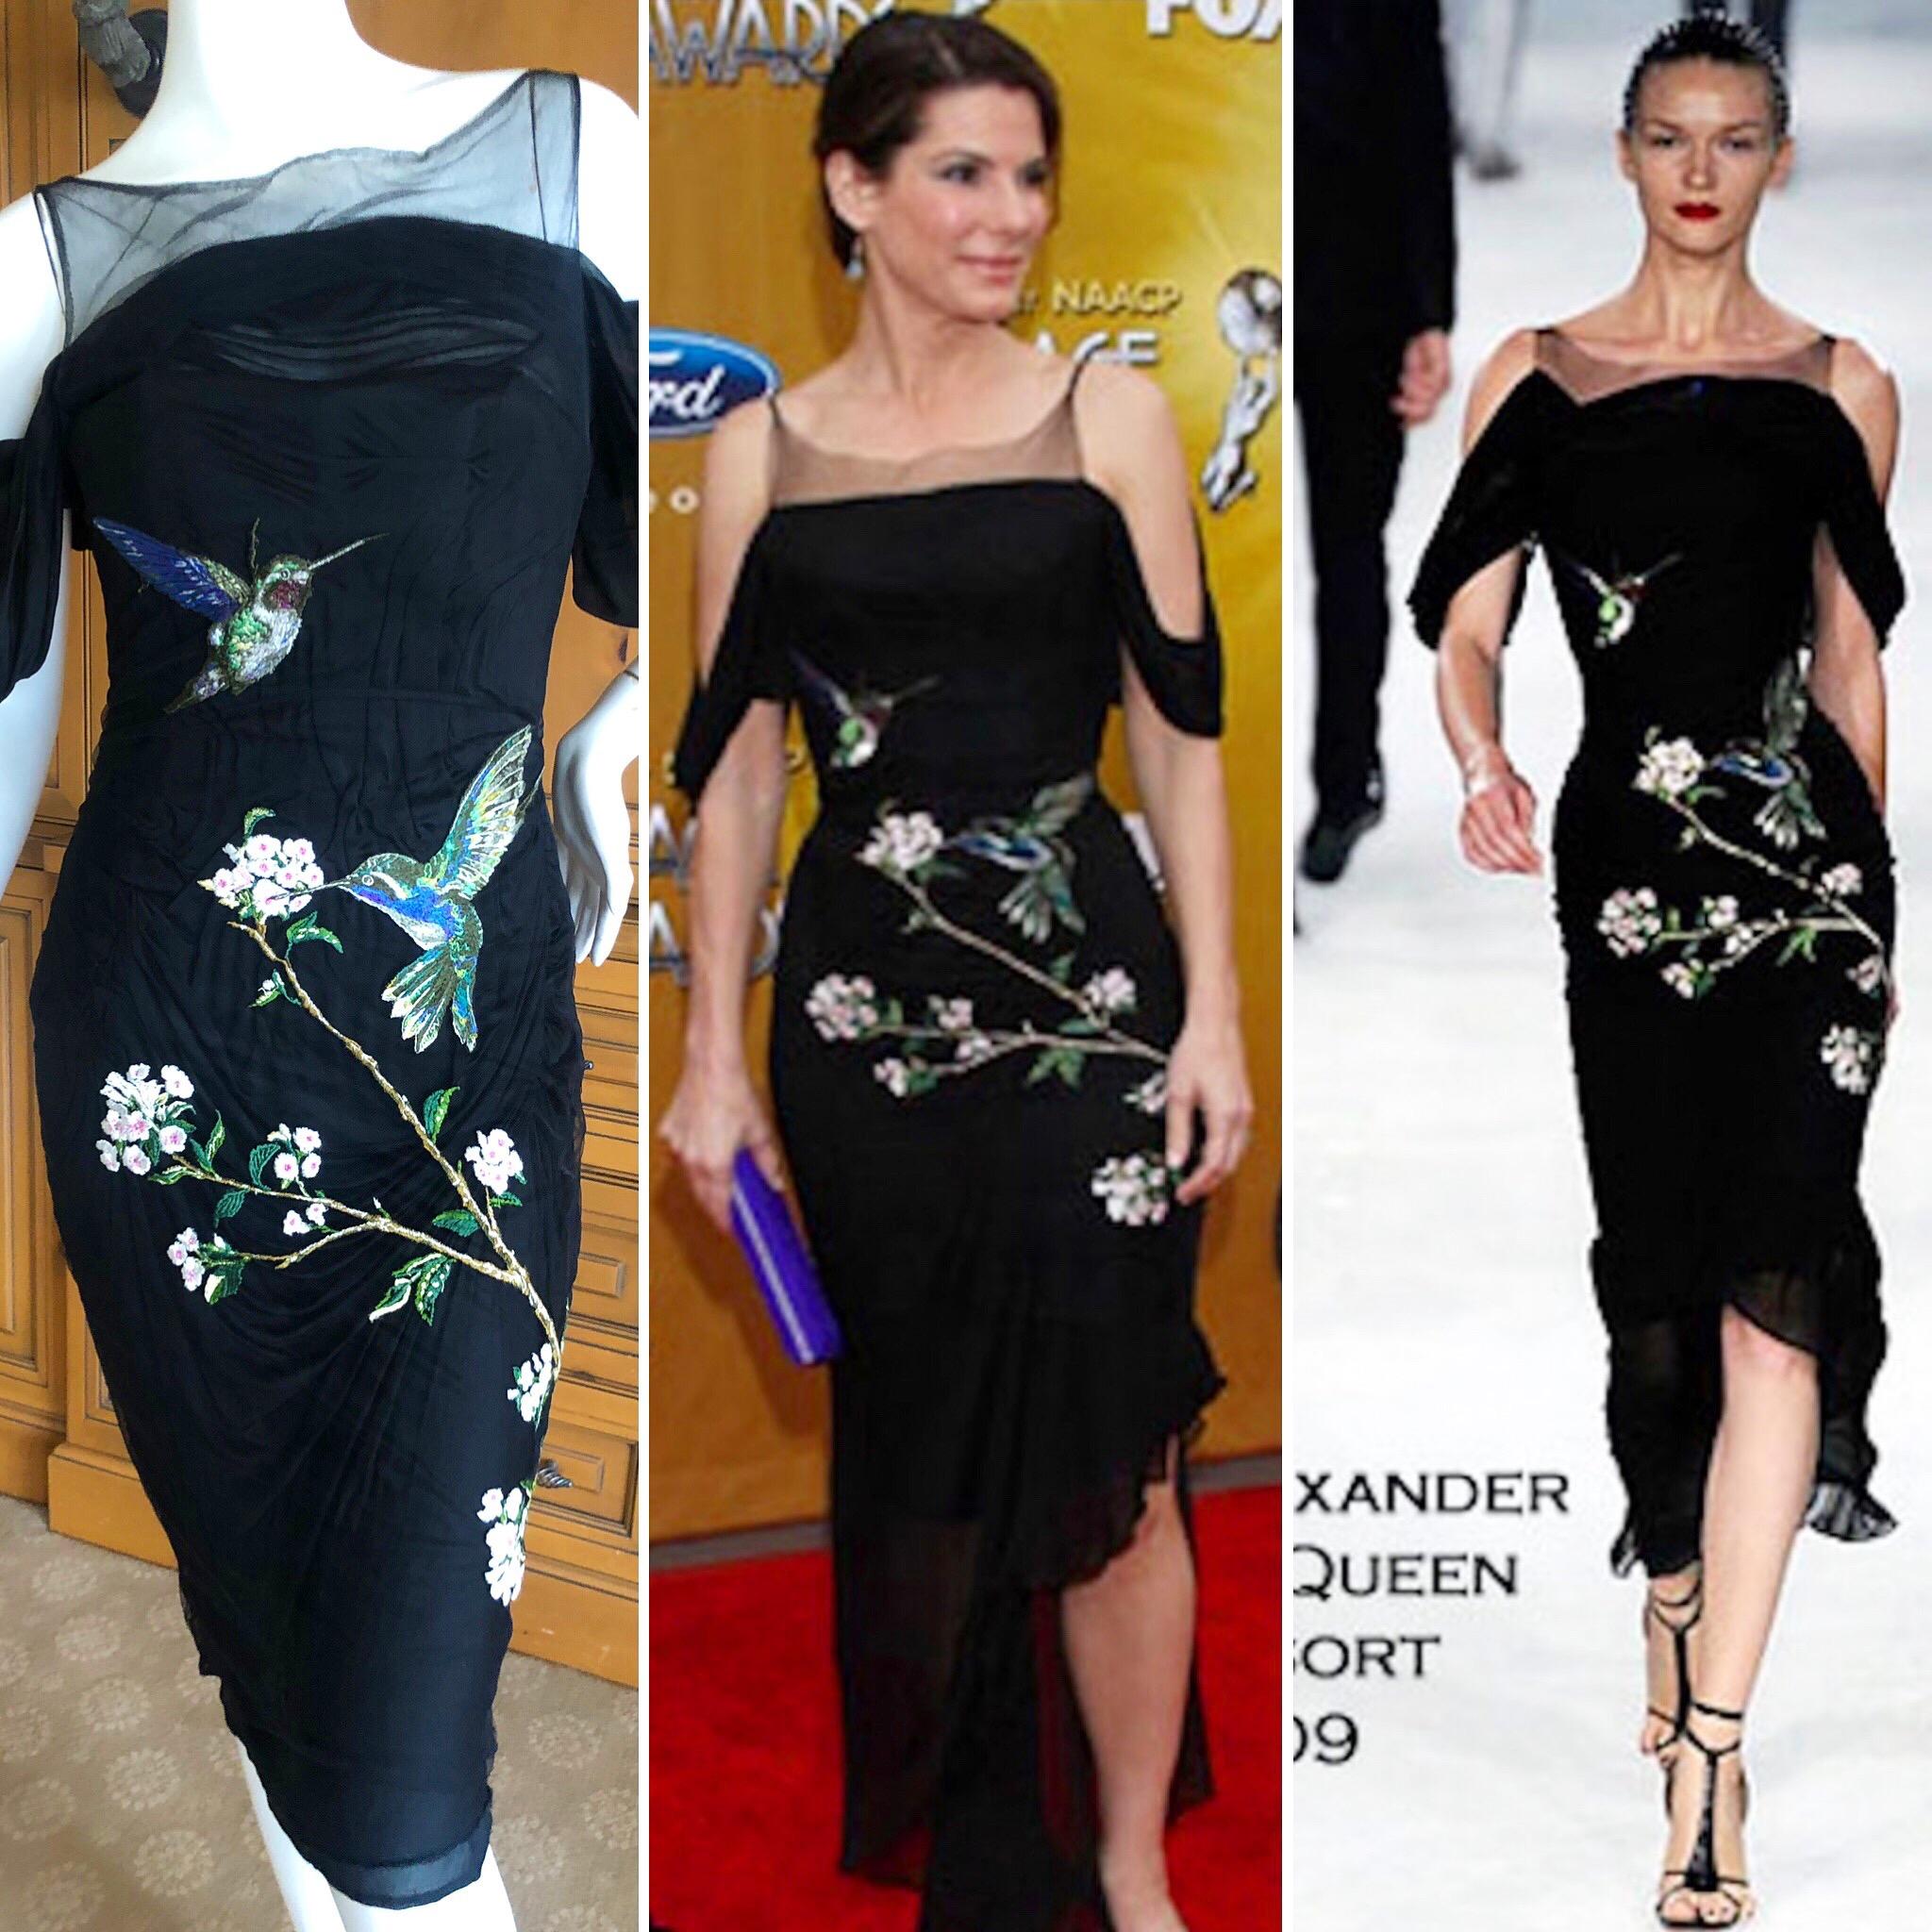 Alexander McQueen Resort 2009 Hummingbird Embroidered Little Black Dress.
Full inner corset.
So pretty, please use the zoom feature to see the details
Size 42 but seems to run small.
  Bust 34